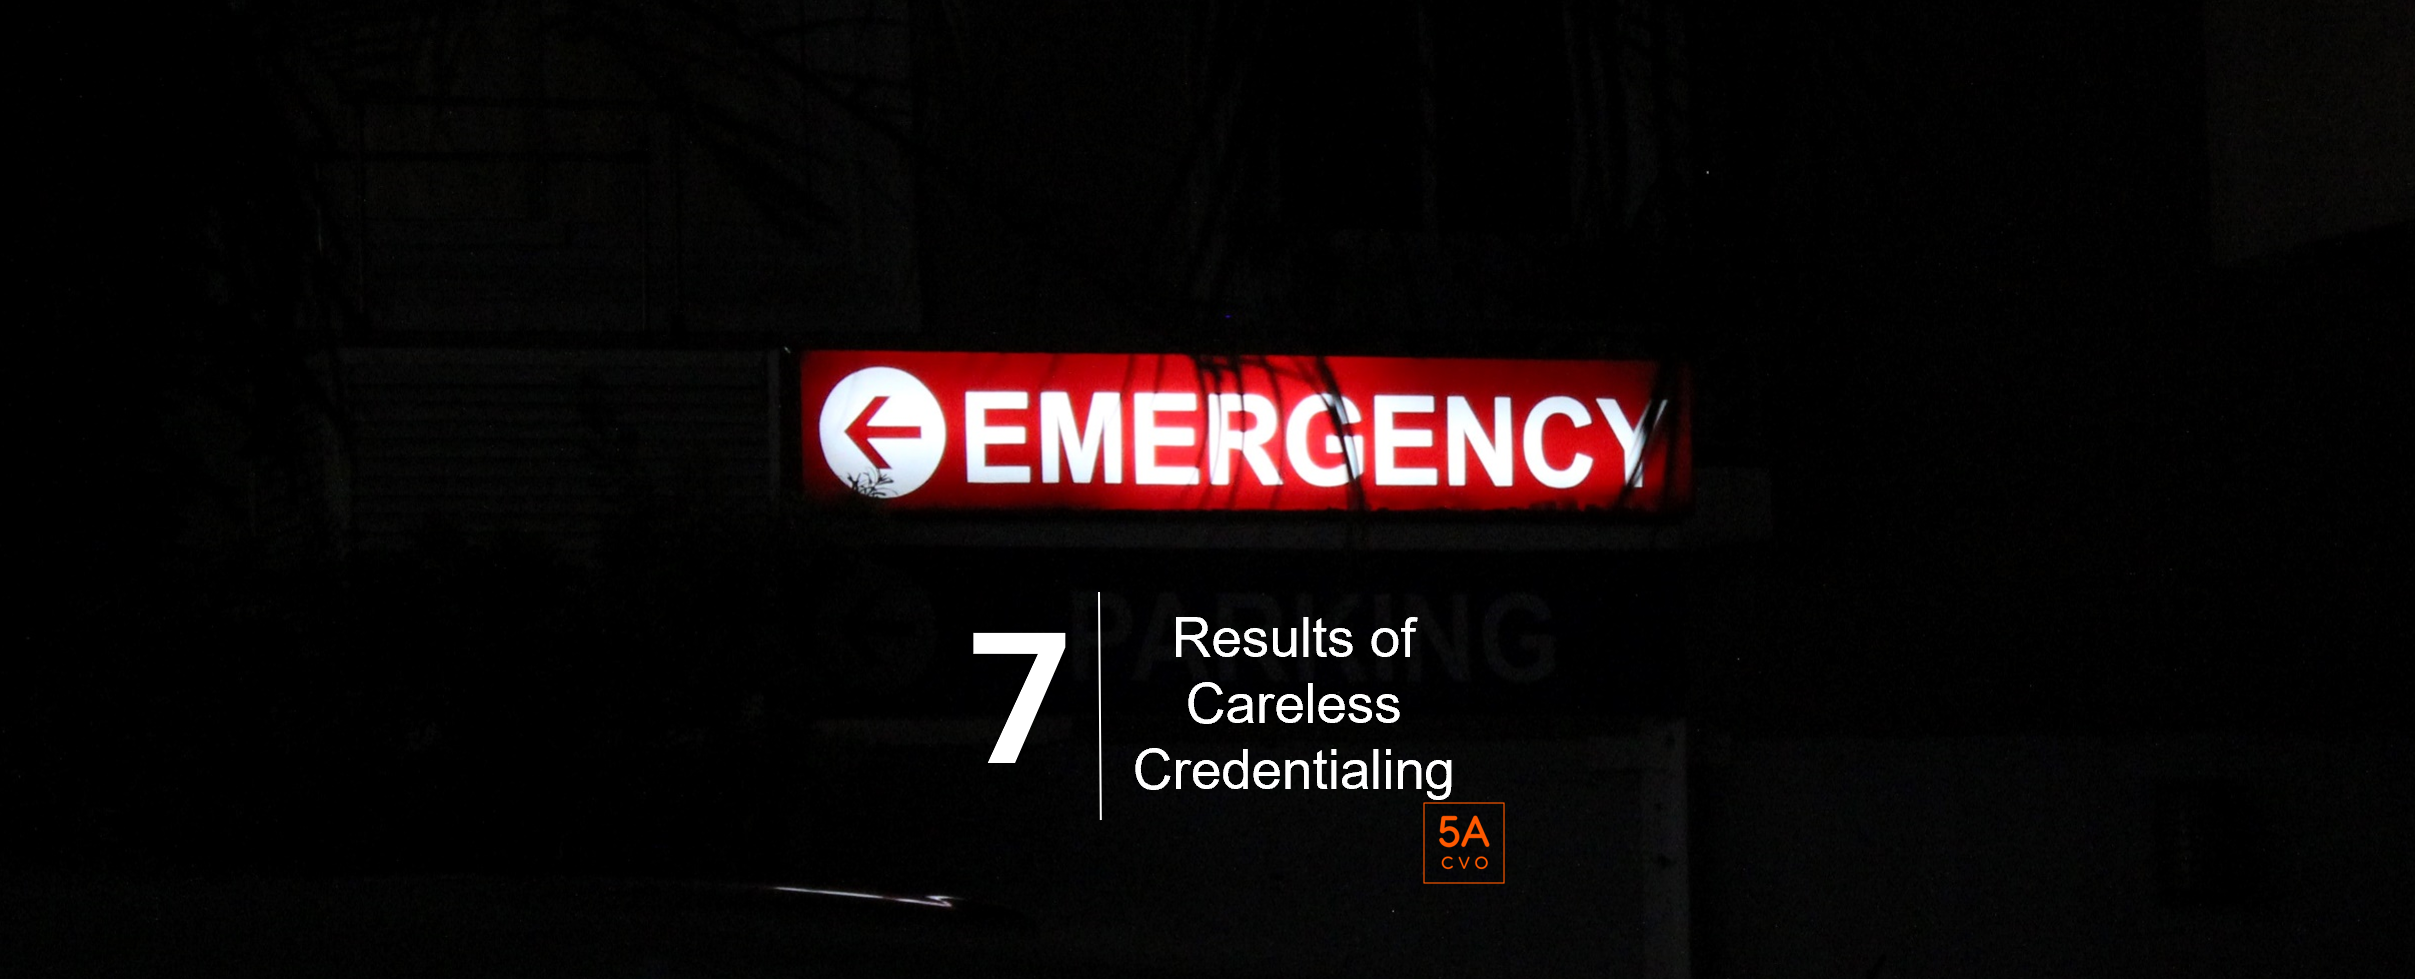 7 Results of Careless Credentialing